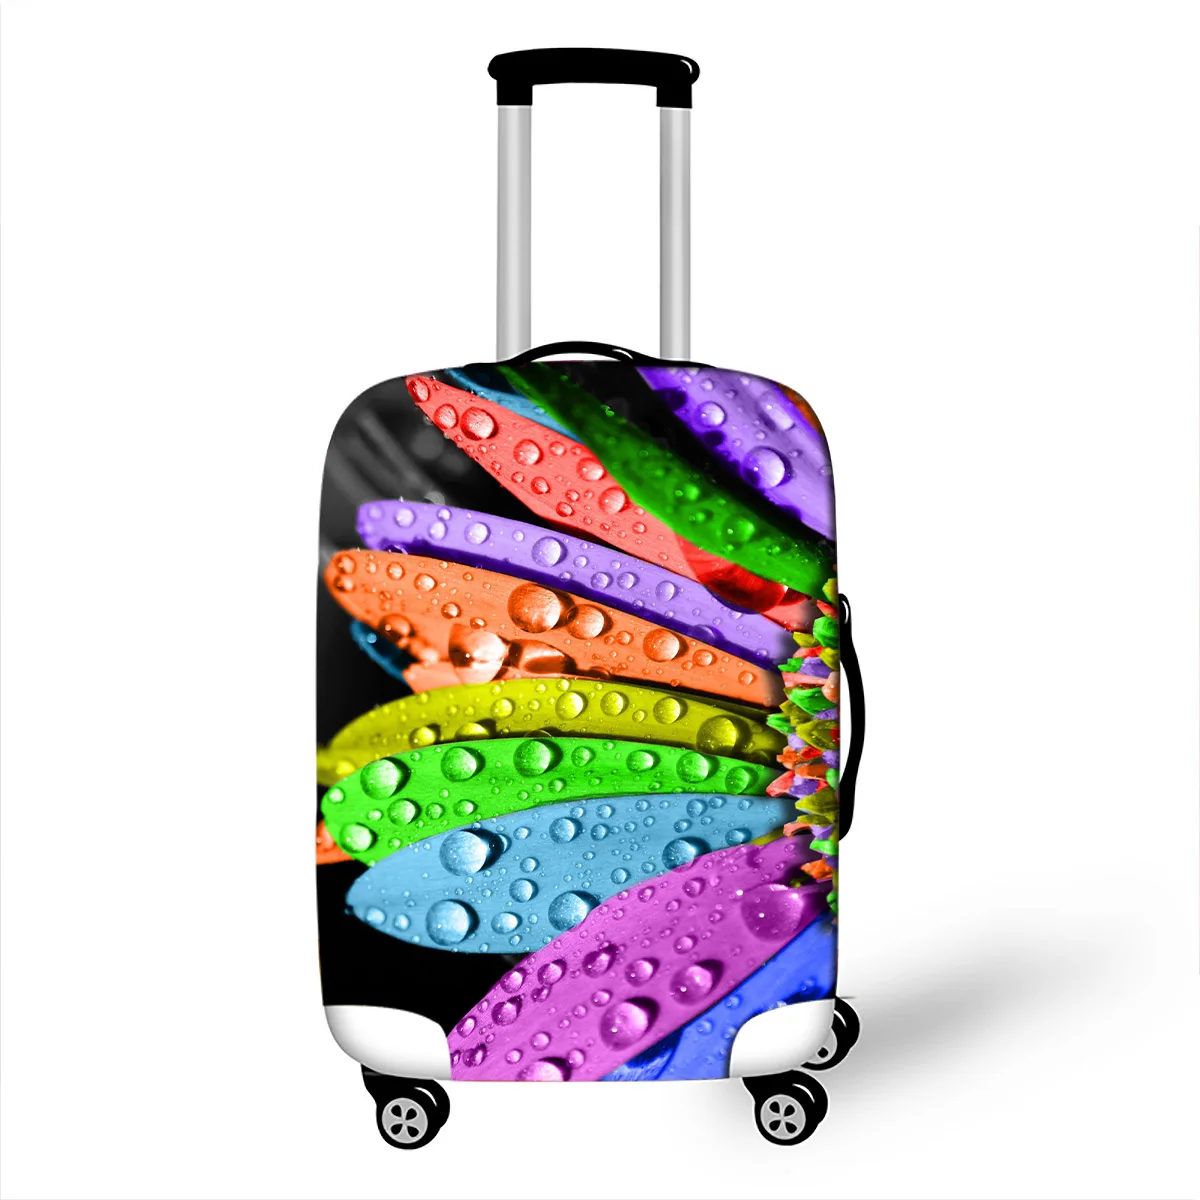 3D Flower Travel Luggage Protective Cover Suitable 18-32 Inch Women's Trolley Suitcase Elastic Trunk Case Dust Covers